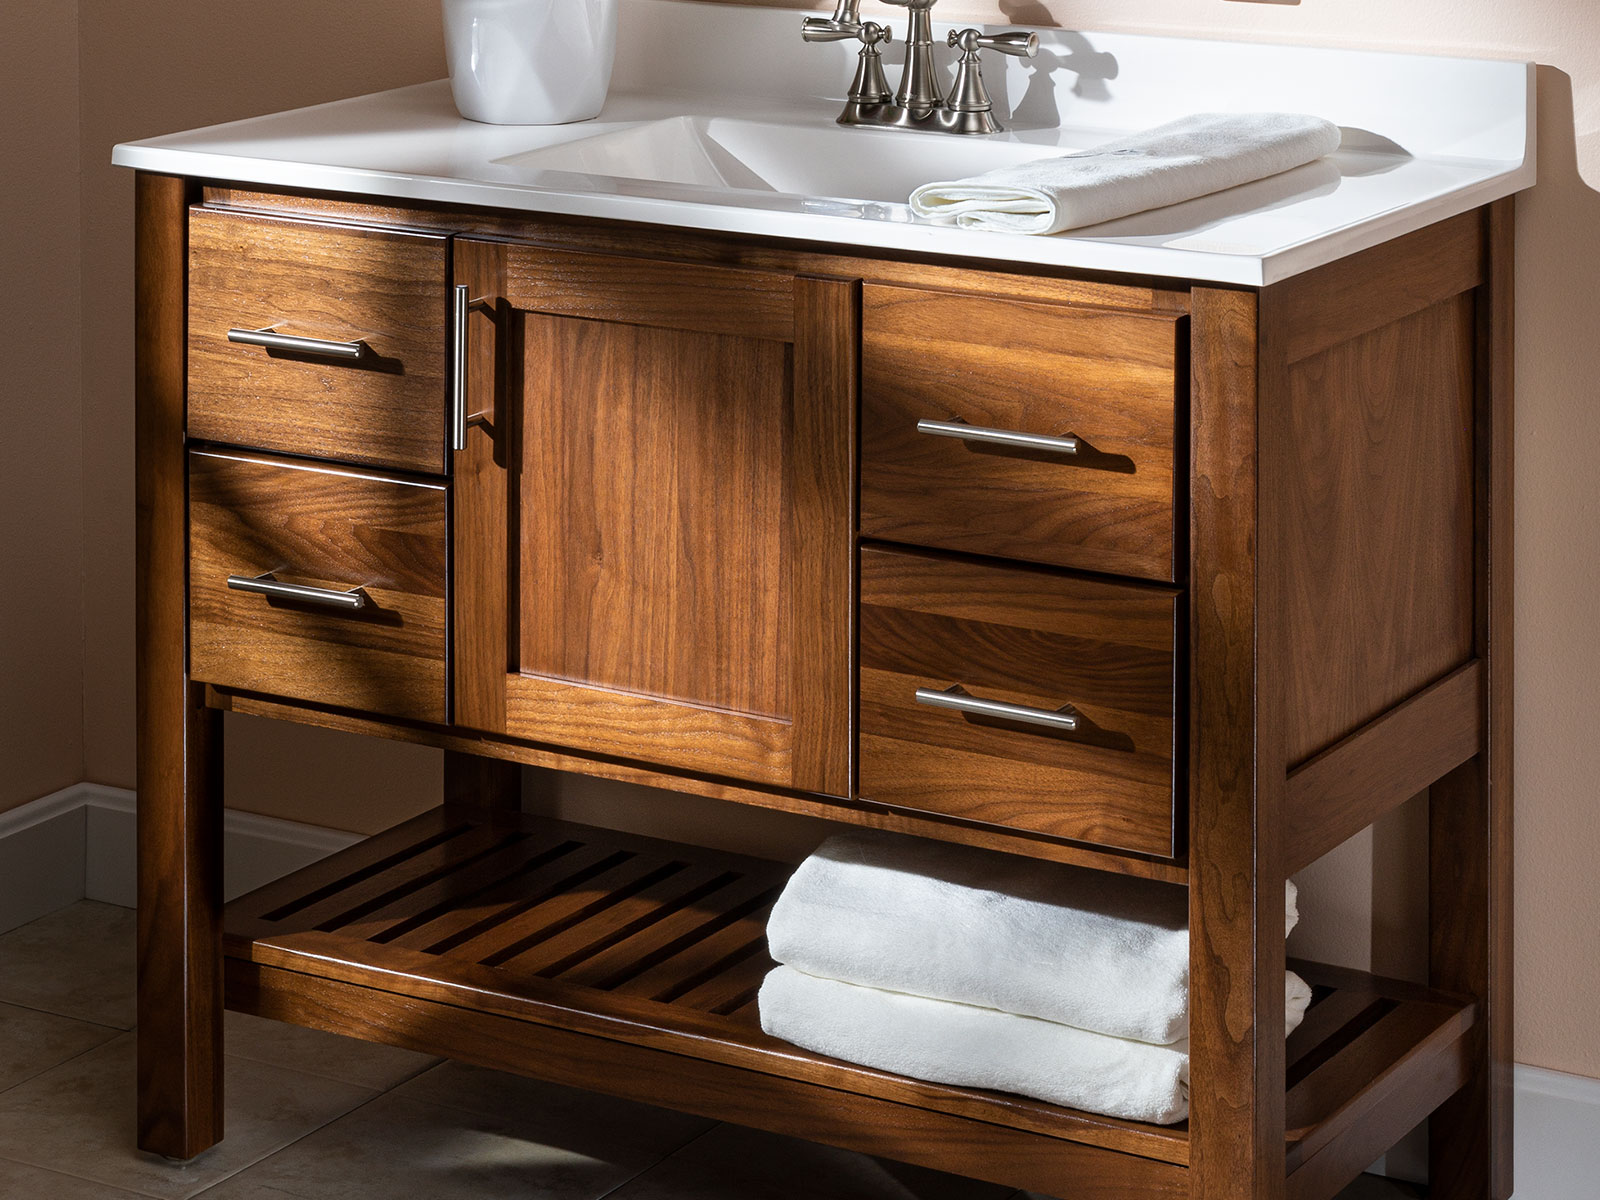 Bath Vanities And Cabinetry, Bath Vanity With Sink